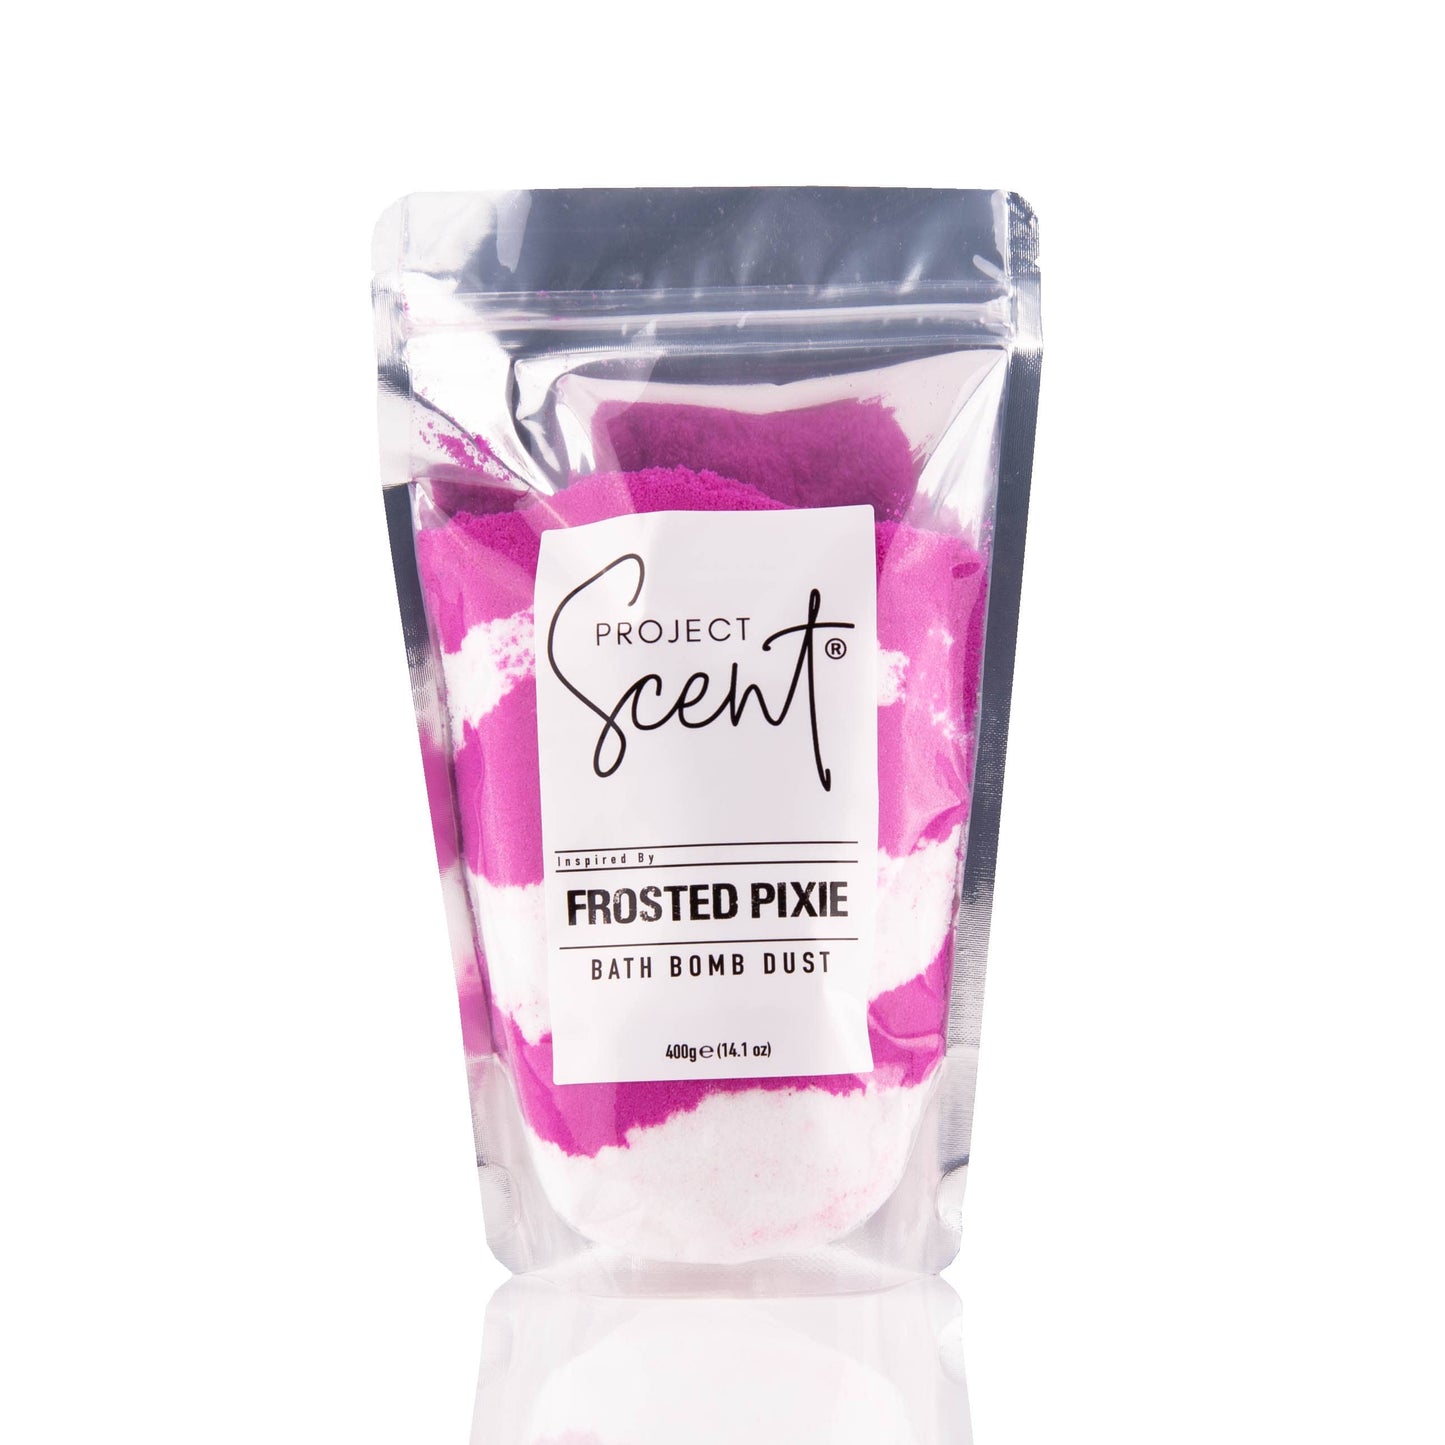 Project Scent Frosted Pixie Bath Bomb Dust 200g & 400g